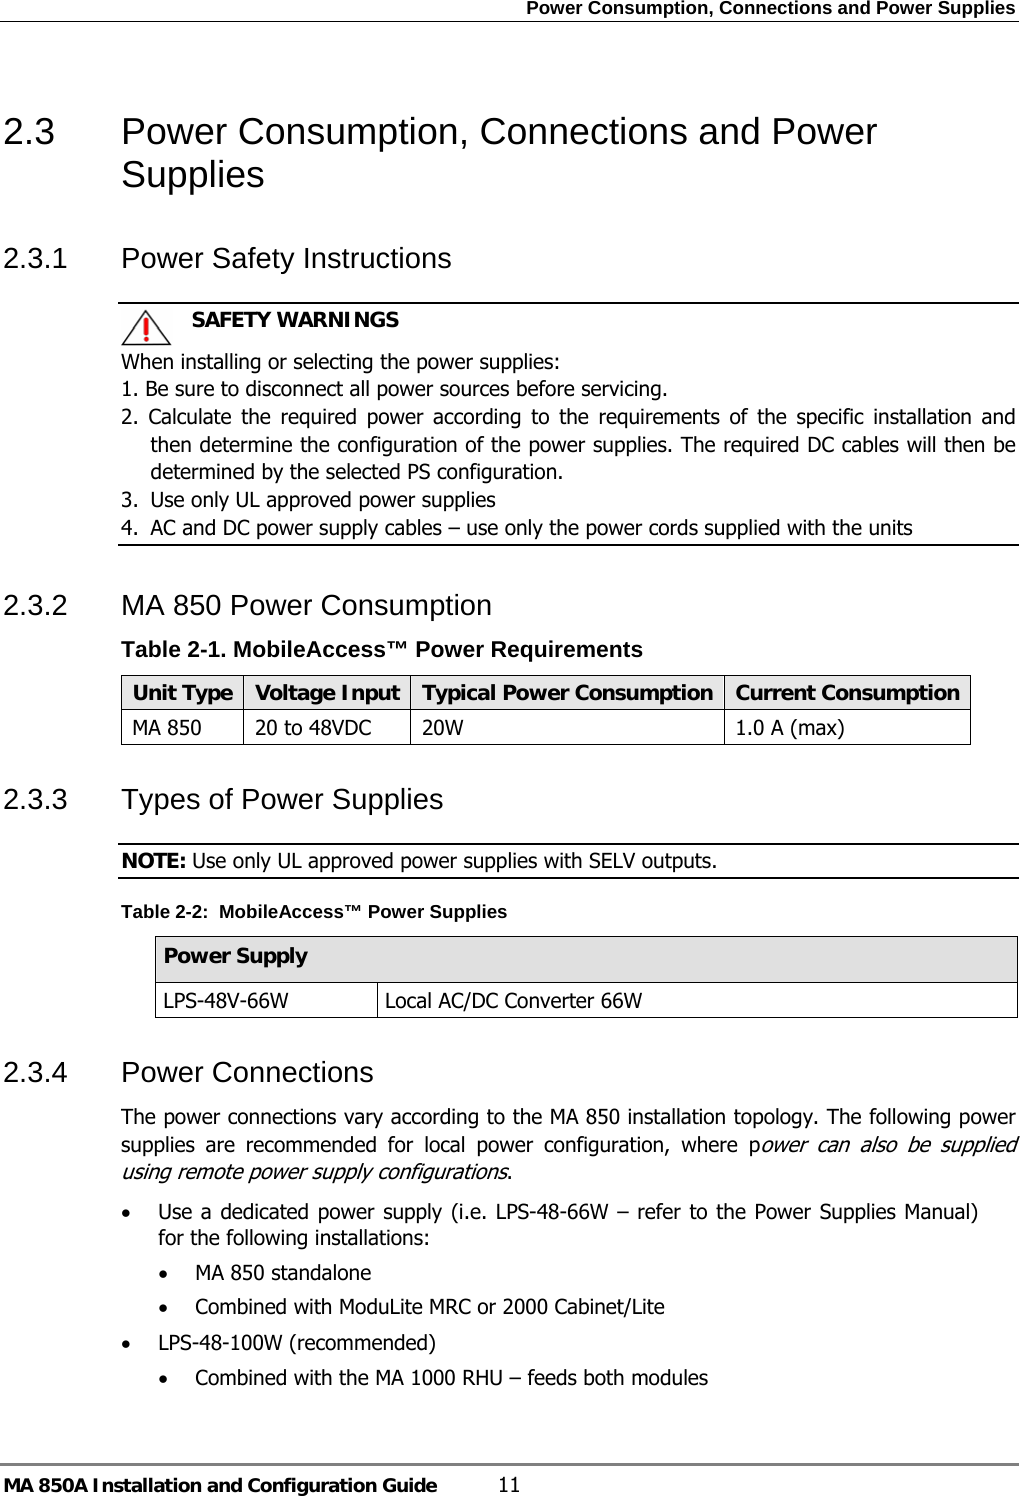 Power Consumption, Connections and Power Supplies MA 850A Installation and Configuration Guide  11 2.3  Power Consumption, Connections and Power Supplies 2.3.1  Power Safety Instructions    SAFETY WARNINGS When installing or selecting the power supplies:   1. Be sure to disconnect all power sources before servicing. 2. Calculate the required power according to the requirements of the specific installation and then determine the configuration of the power supplies. The required DC cables will then be determined by the selected PS configuration. 3.  Use only UL approved power supplies  4.  AC and DC power supply cables – use only the power cords supplied with the units  2.3.2  MA 850 Power Consumption  Table  2-1. MobileAccess™ Power Requirements Unit Type  Voltage Input Typical Power Consumption Current ConsumptionMA 850  20 to 48VDC  20W  1.0 A (max) 2.3.3  Types of Power Supplies NOTE: Use only UL approved power supplies with SELV outputs. Table  2-2:  MobileAccess™ Power Supplies Power Supply LPS-48V-66W  Local AC/DC Converter 66W  2.3.4  Power Connections  The power connections vary according to the MA 850 installation topology. The following power supplies are recommended for local power configuration, where power can also be supplied using remote power supply configurations. • Use a dedicated power supply (i.e. LPS-48-66W – refer to the Power Supplies Manual) for the following installations: • MA 850 standalone • Combined with ModuLite MRC or 2000 Cabinet/Lite • LPS-48-100W (recommended)  • Combined with the MA 1000 RHU – feeds both modules  